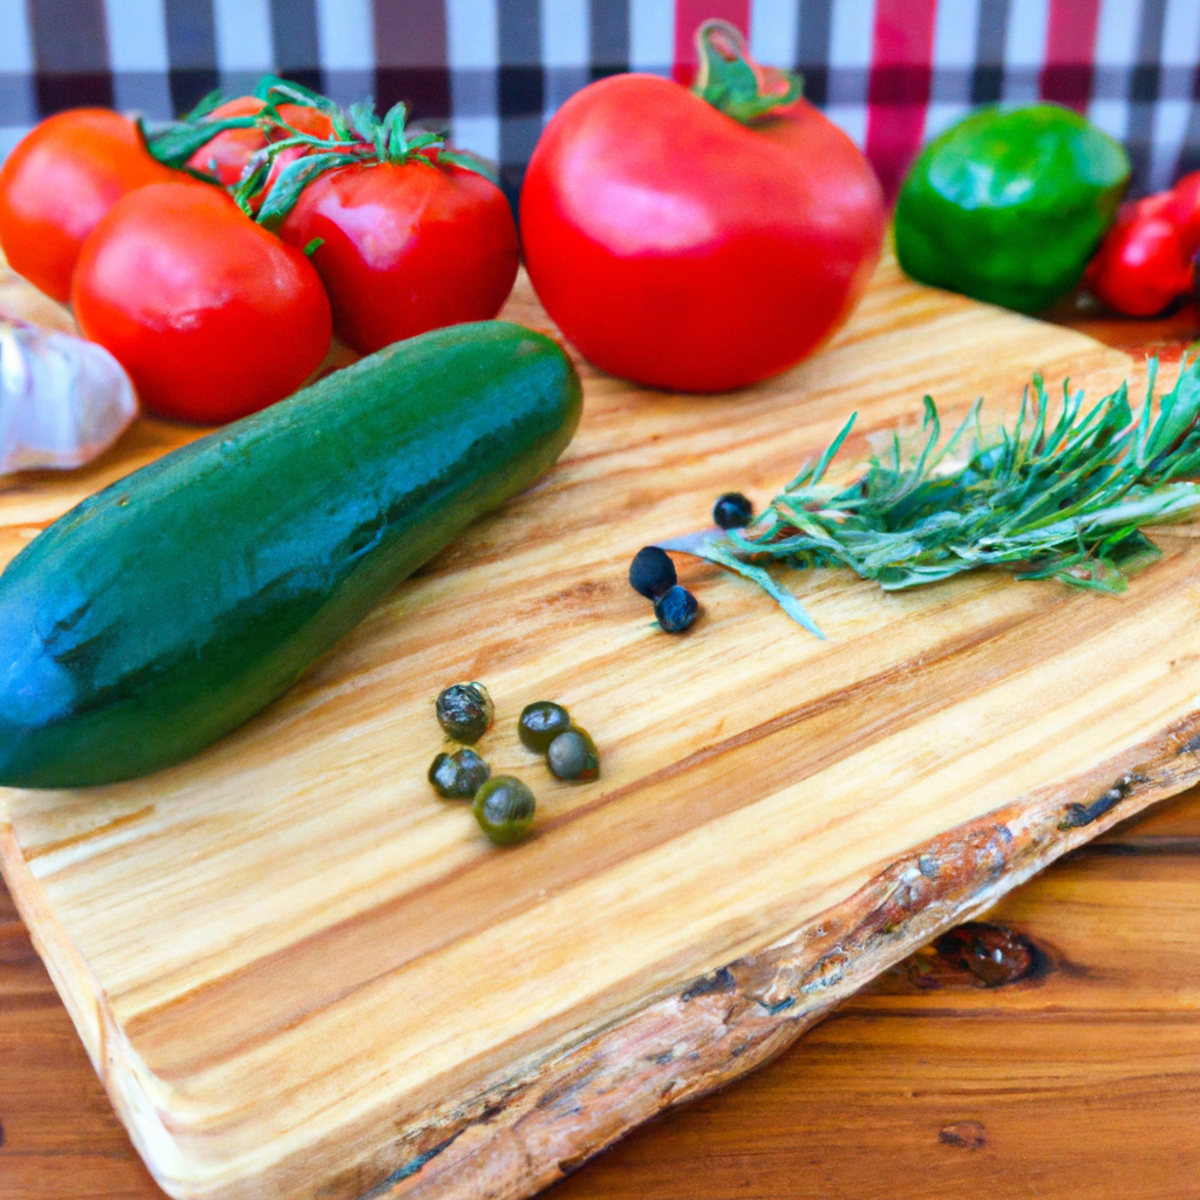 The photo features a wooden cutting board with a colorful array of fresh ingredients arranged neatly on top. A ripe tomato, vibrant red bell pepper, crisp cucumber, and fragrant garlic cloves are all prominently displayed. A sprig of fresh rosemary and a handful of bright green olives add a pop of color and texture to the scene. In the background, a rustic kitchen with a stone countertop and a vintage mortar and pestle can be seen, hinting at the traditional cooking methods used in Mediterranean cuisine. The photo captures the essence of the article's message: that nourishing your body with fresh, whole foods is easy and delicious with the Mediterranean diet.